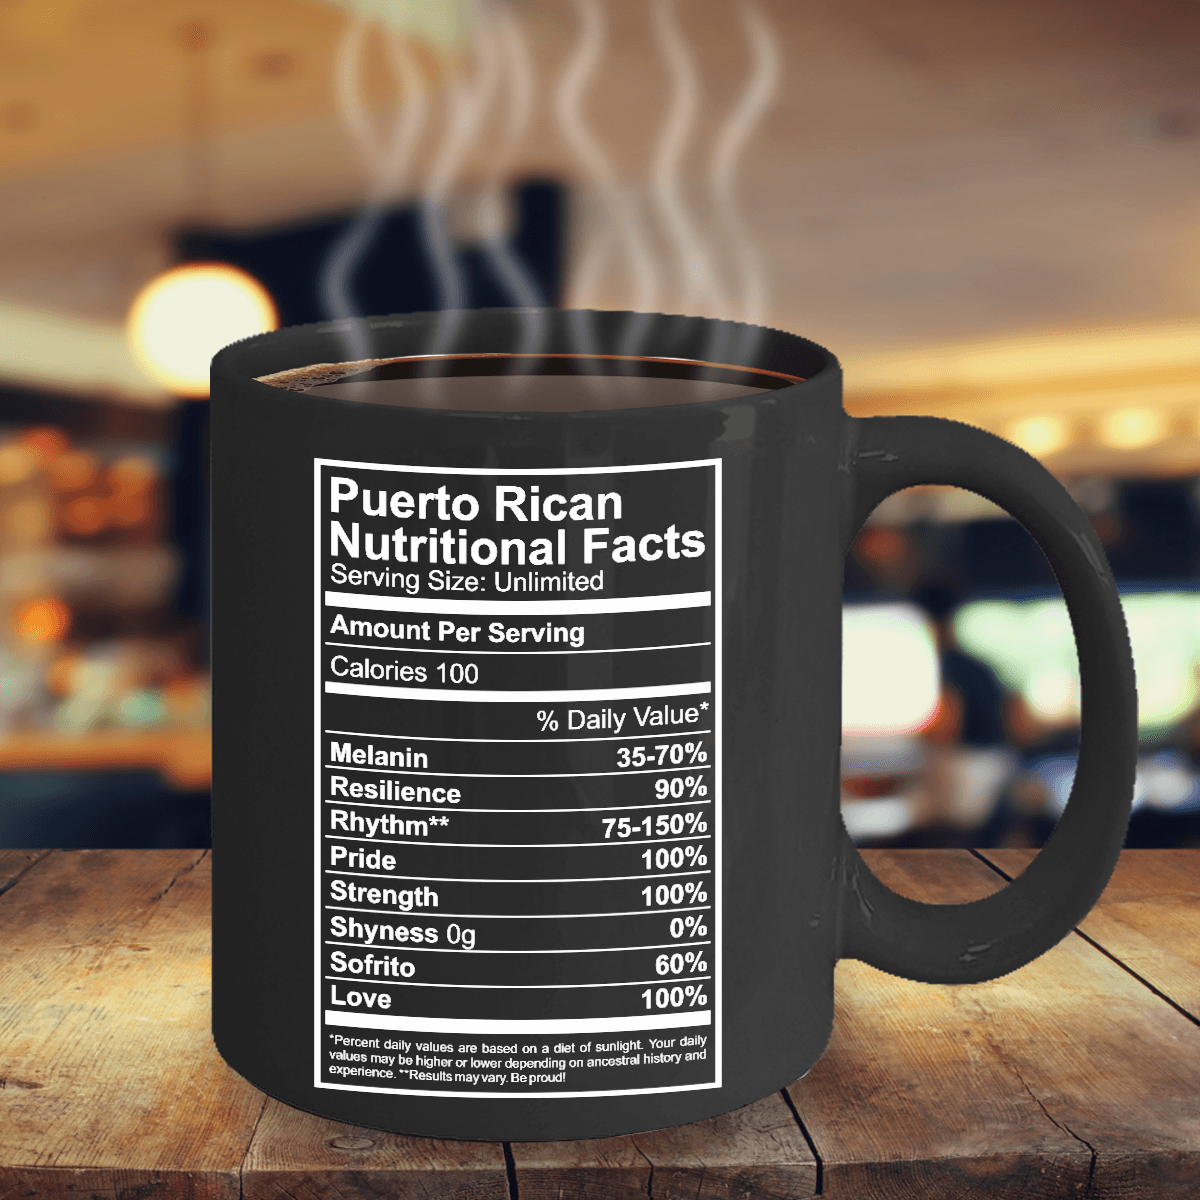 Puerto Rican Nutritional Facts 15oz Black Coffee Cup